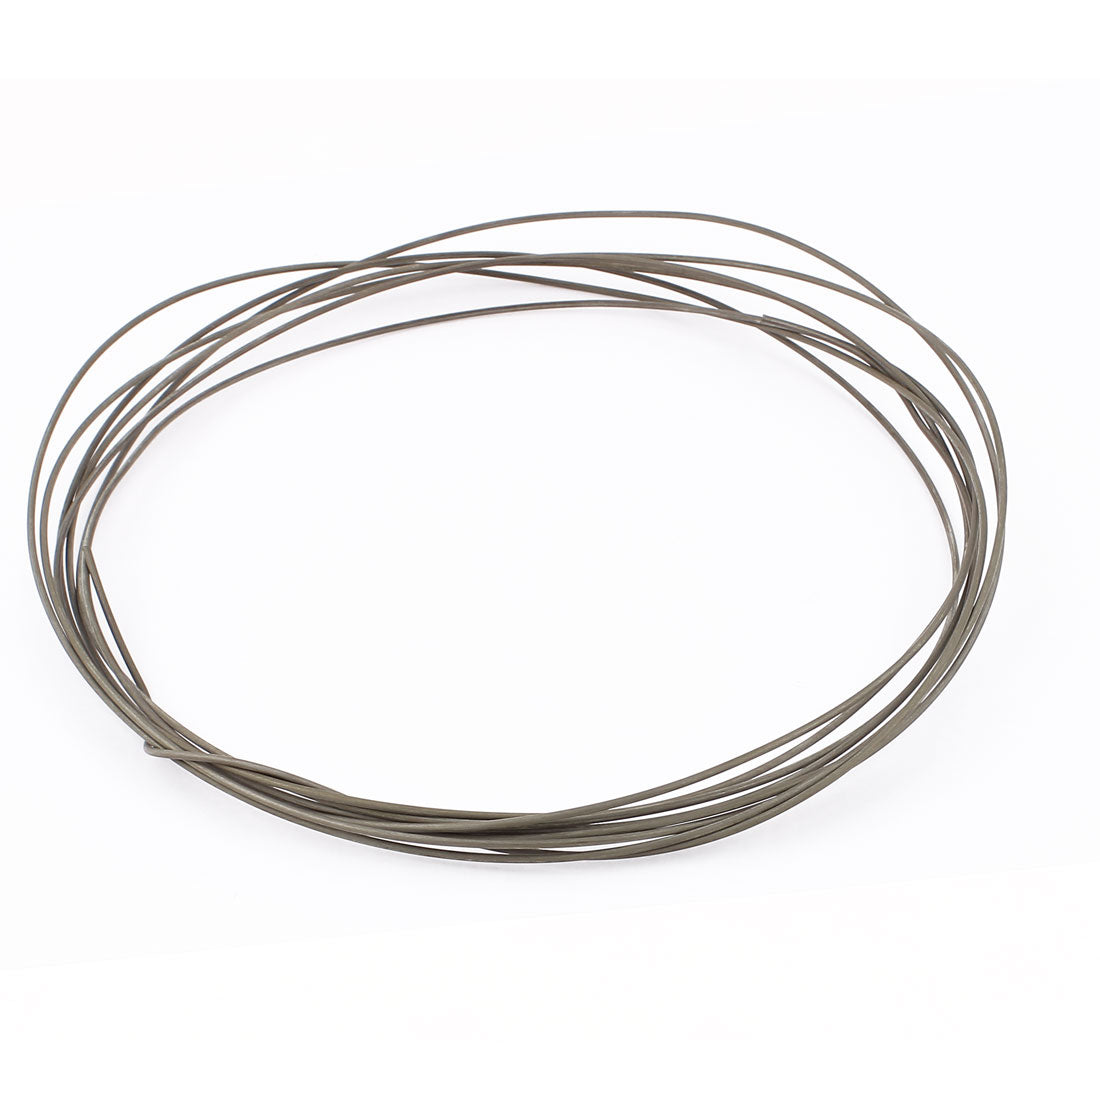 uxcell Uxcell 2mm Diameter 12Gauge AWG 16.4ft Roll Heating Heater Element Wire